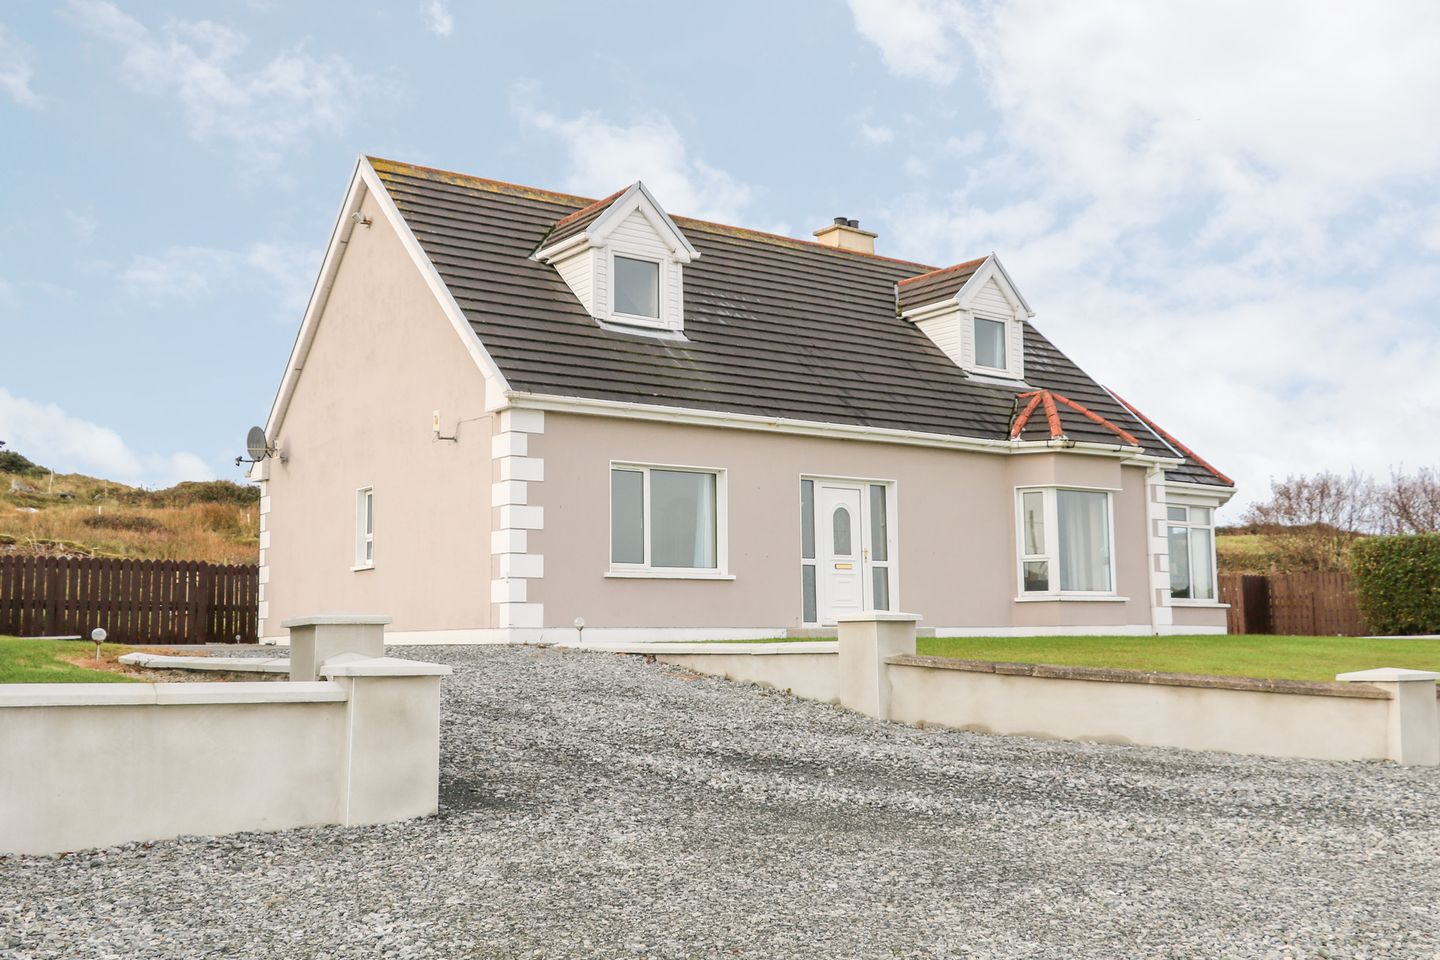 Ref. 1033870 Seaview, RINBOY, Kindrum, Letterkenny, Co. Donegal